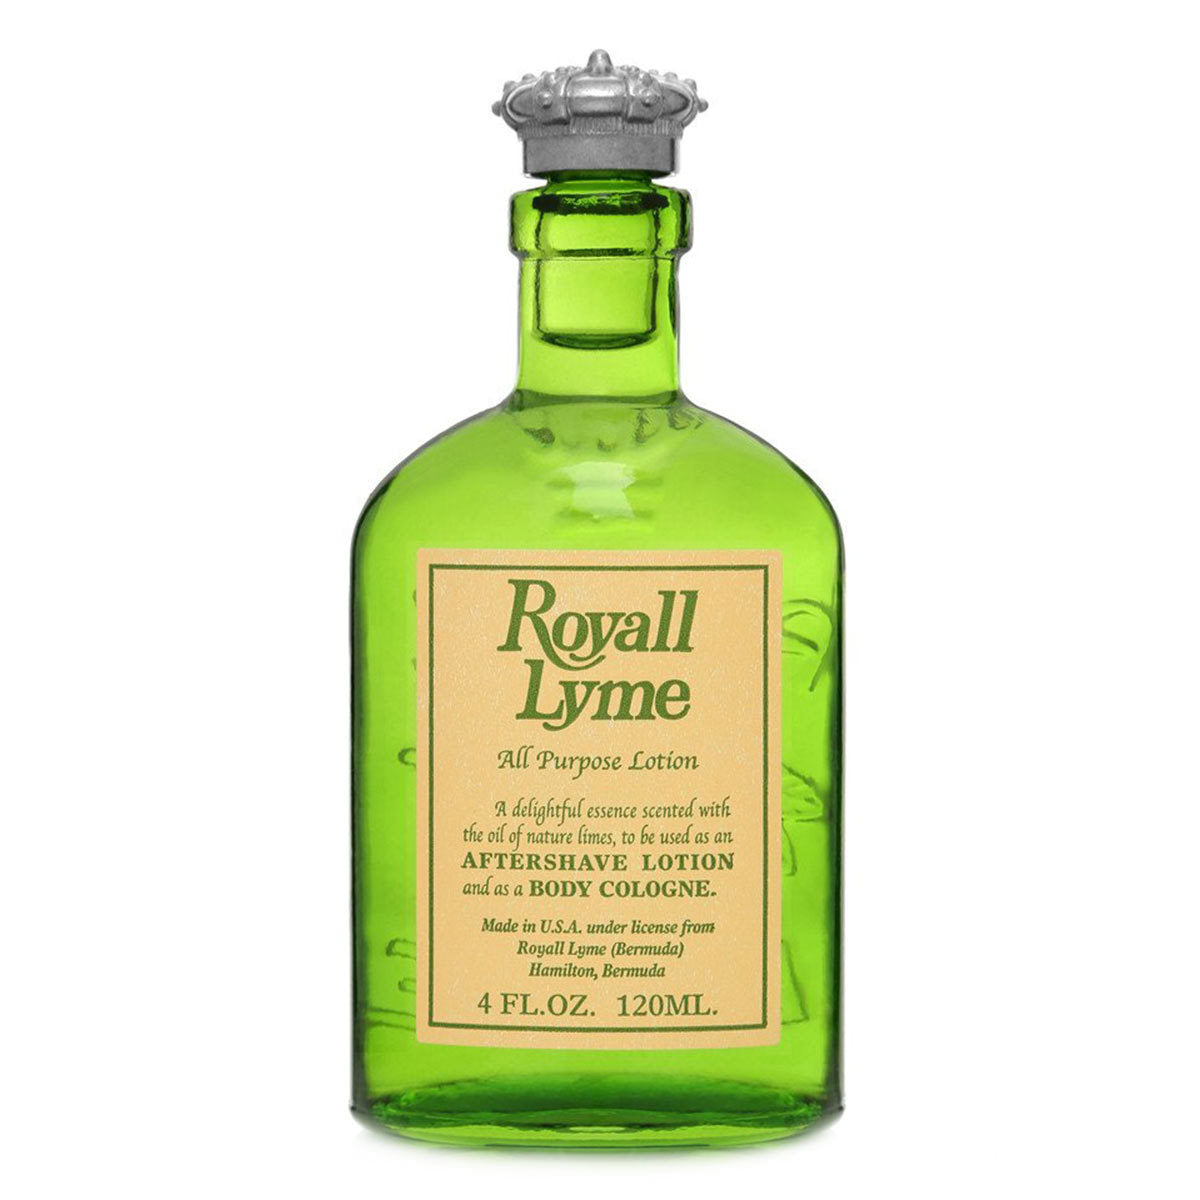 Primary image of Lyme All Purpose Lotion